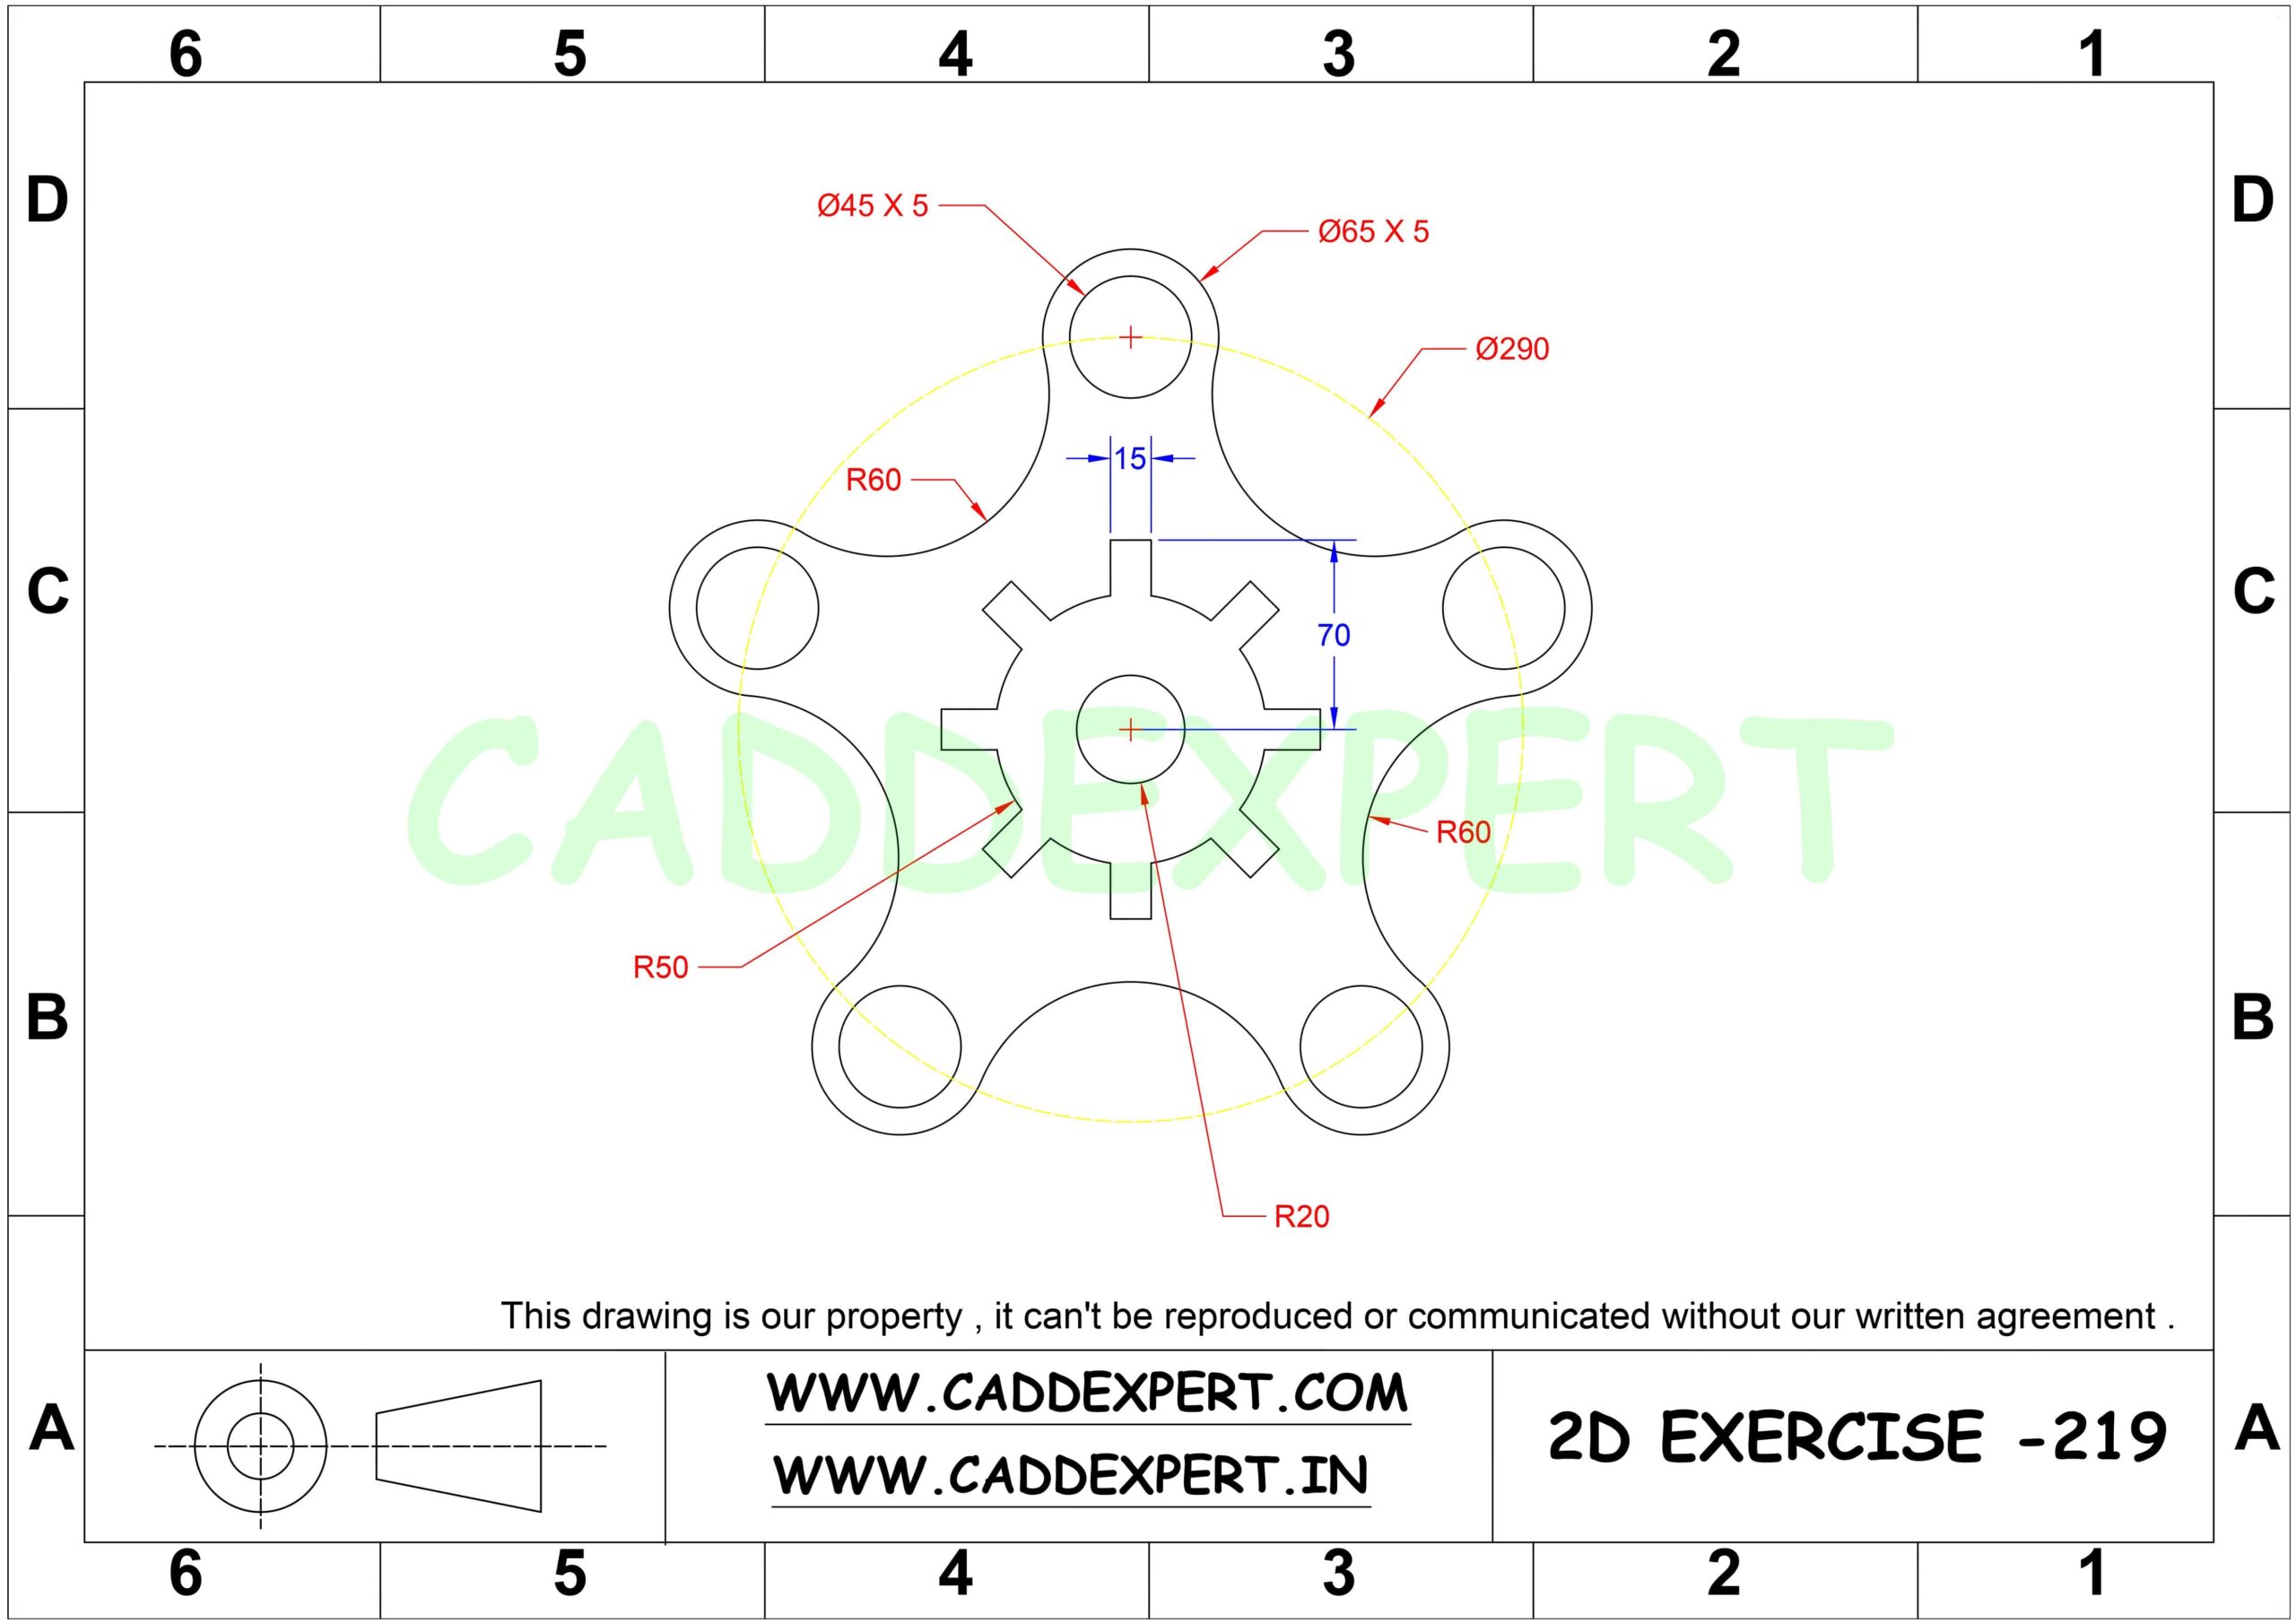 50 AUTOCAD PRACTICE DRAWING - 19